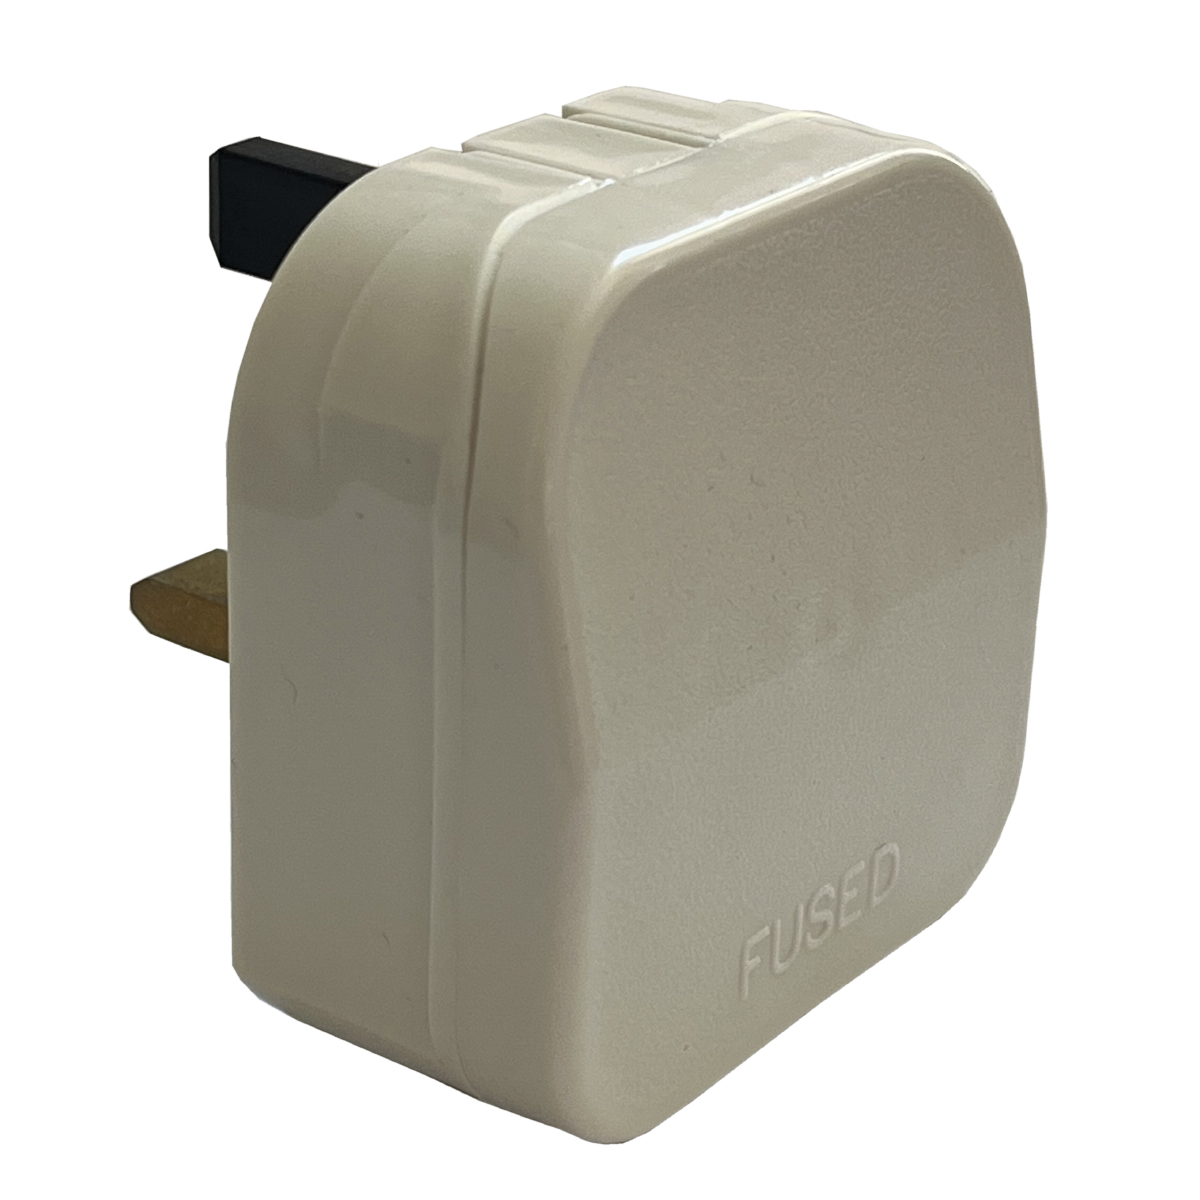 Europe to England travel adapter